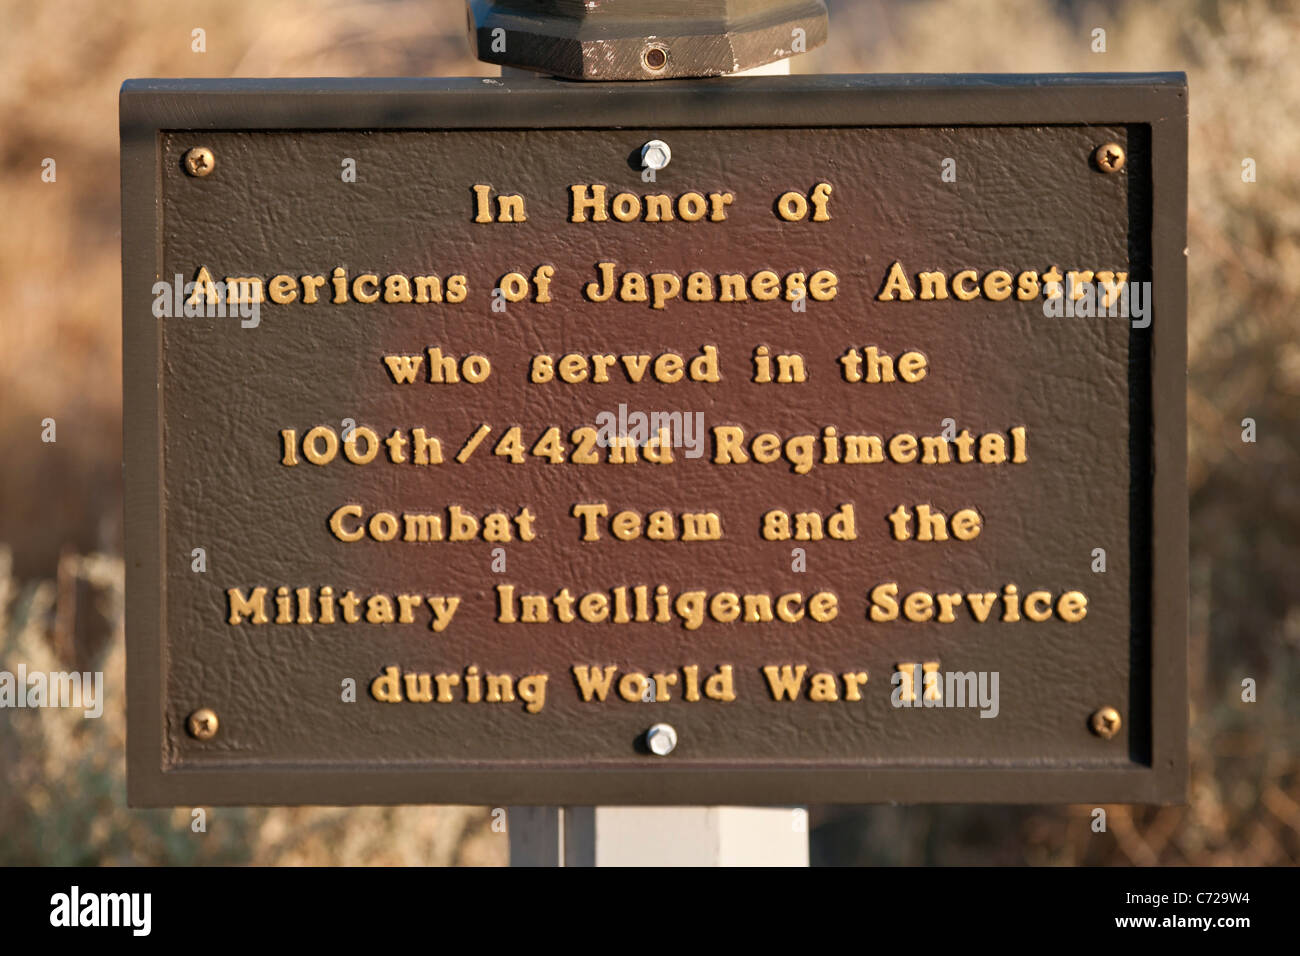 Plaque in honor of Americans of Japanese Ancestry at Manzanar War Relocation Center, Independence, California, USA. JMH5305 Stock Photo